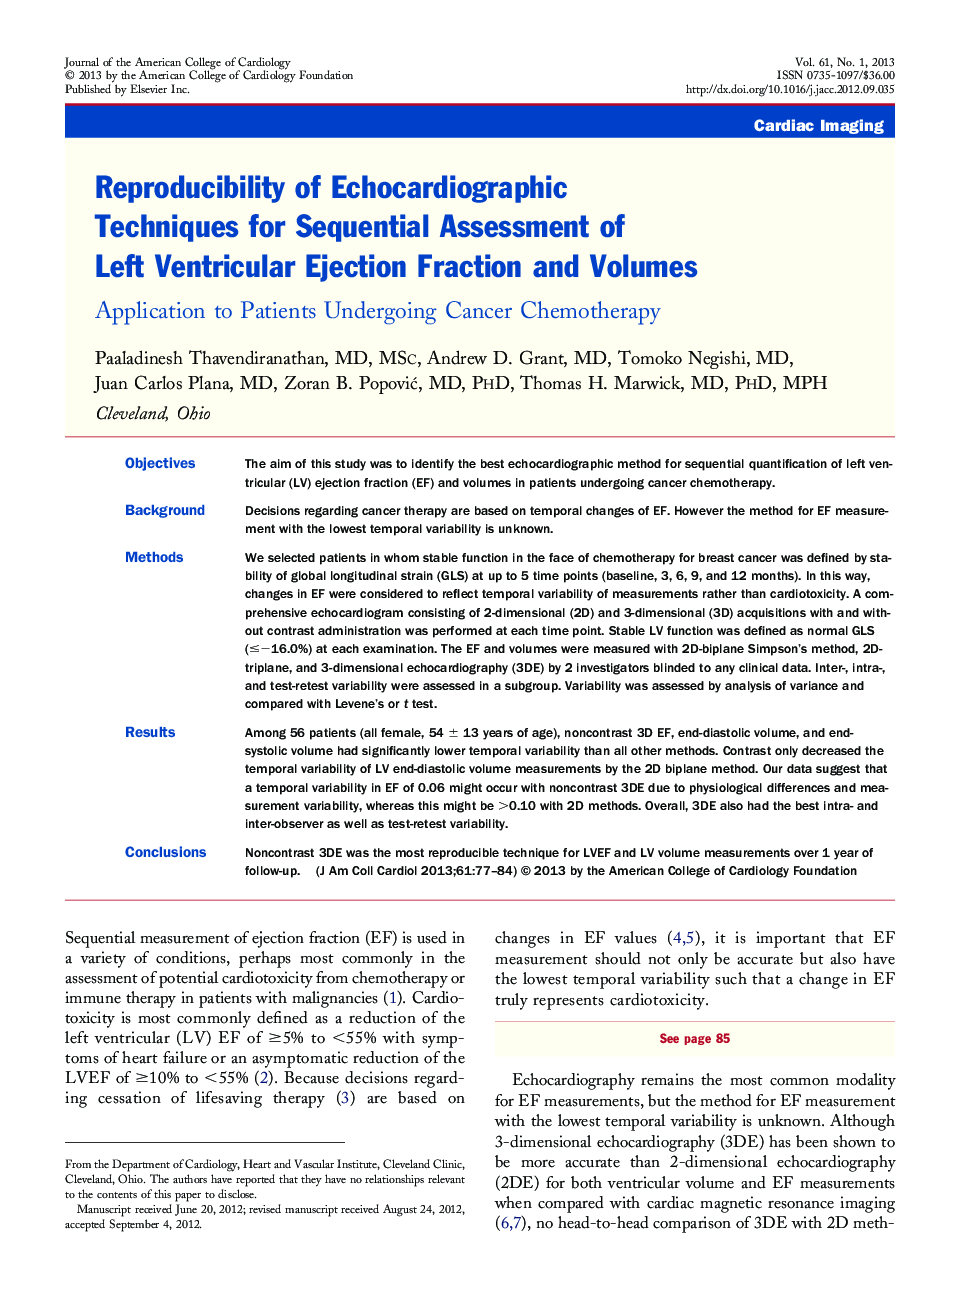 Reproducibility of Echocardiographic Techniques for Sequential Assessment of Left Ventricular Ejection Fraction and Volumes : Application to Patients Undergoing Cancer Chemotherapy